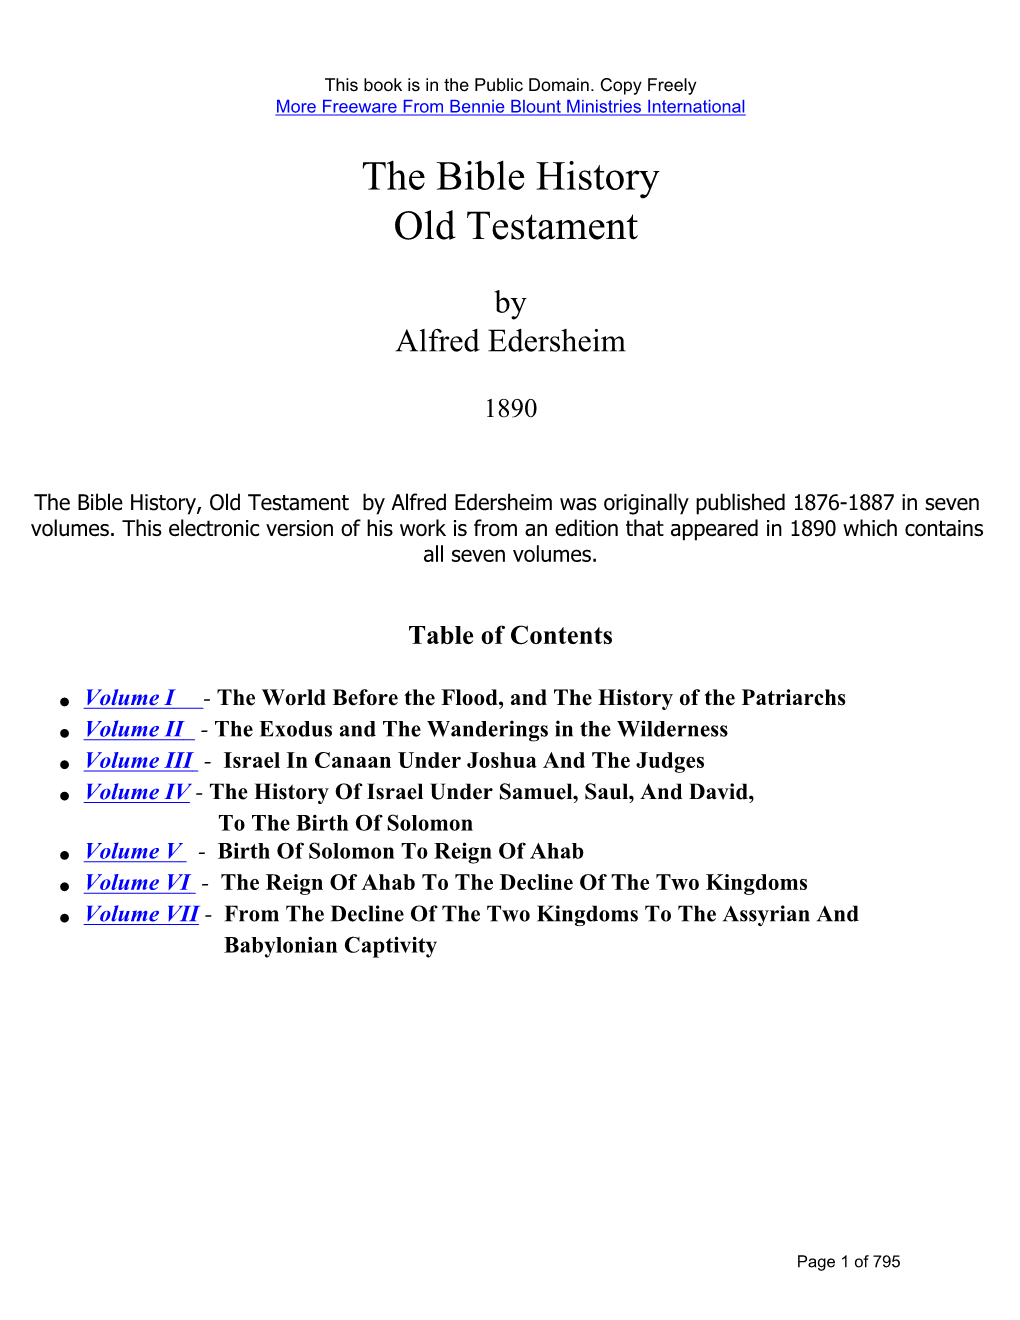 The Bible History Old Testament